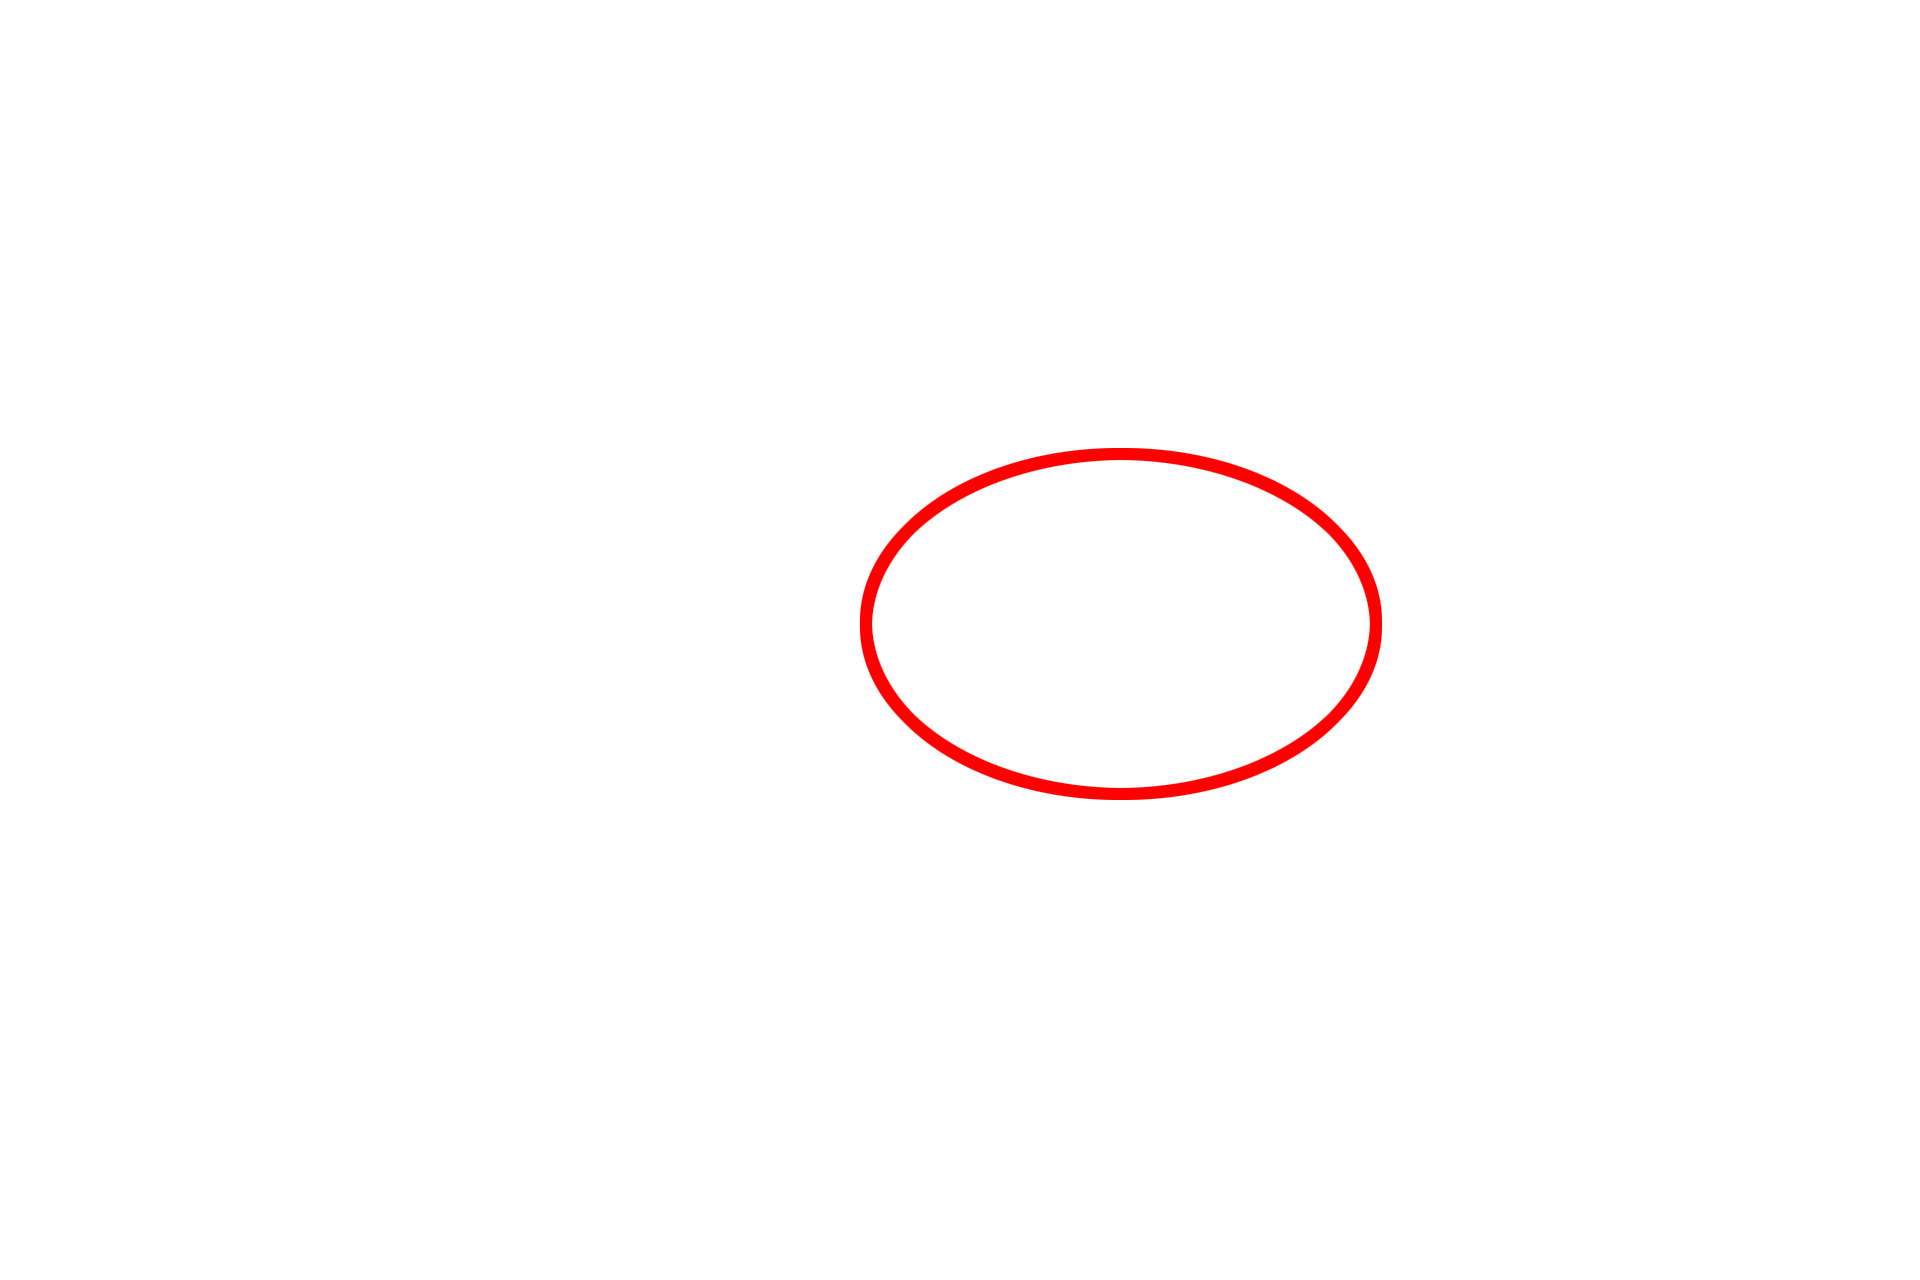  - Nucleolus <p>The nuclear envelope consists of two membranes, an inner and an outer nuclear membrane, which are separated by the perinuclear space.  The perinuclear space and outer nuclear envelope are continuous with the RER.  The nuclear envelope has periodic openings called nuclear pores.  10,000x</p>
